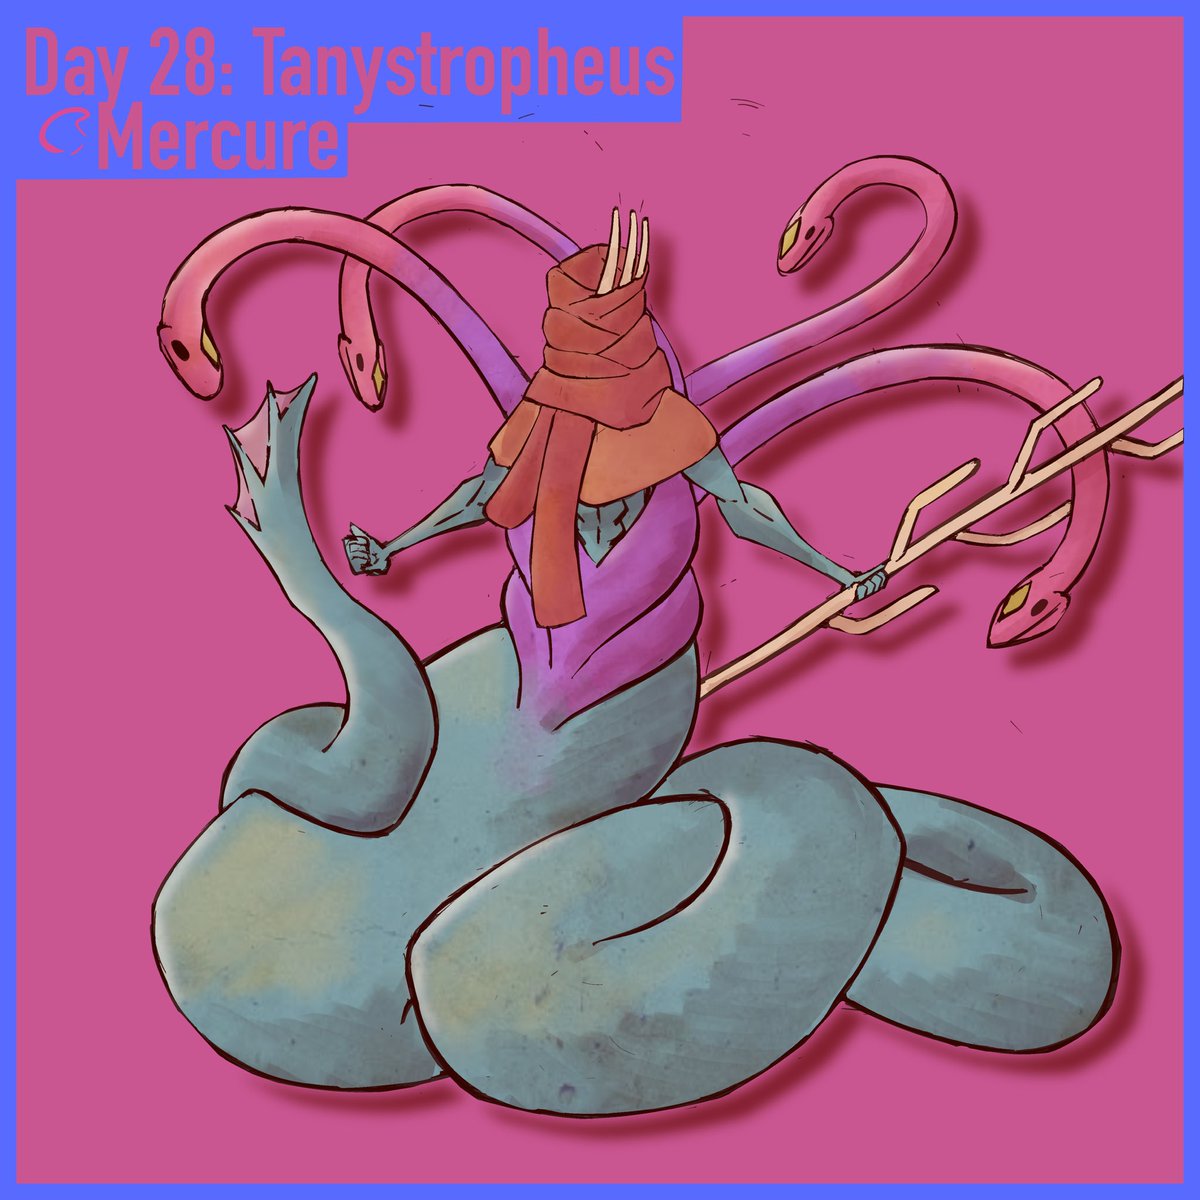 #Maysozoic Day 29: Tanystropheus

A hydra thing for this one